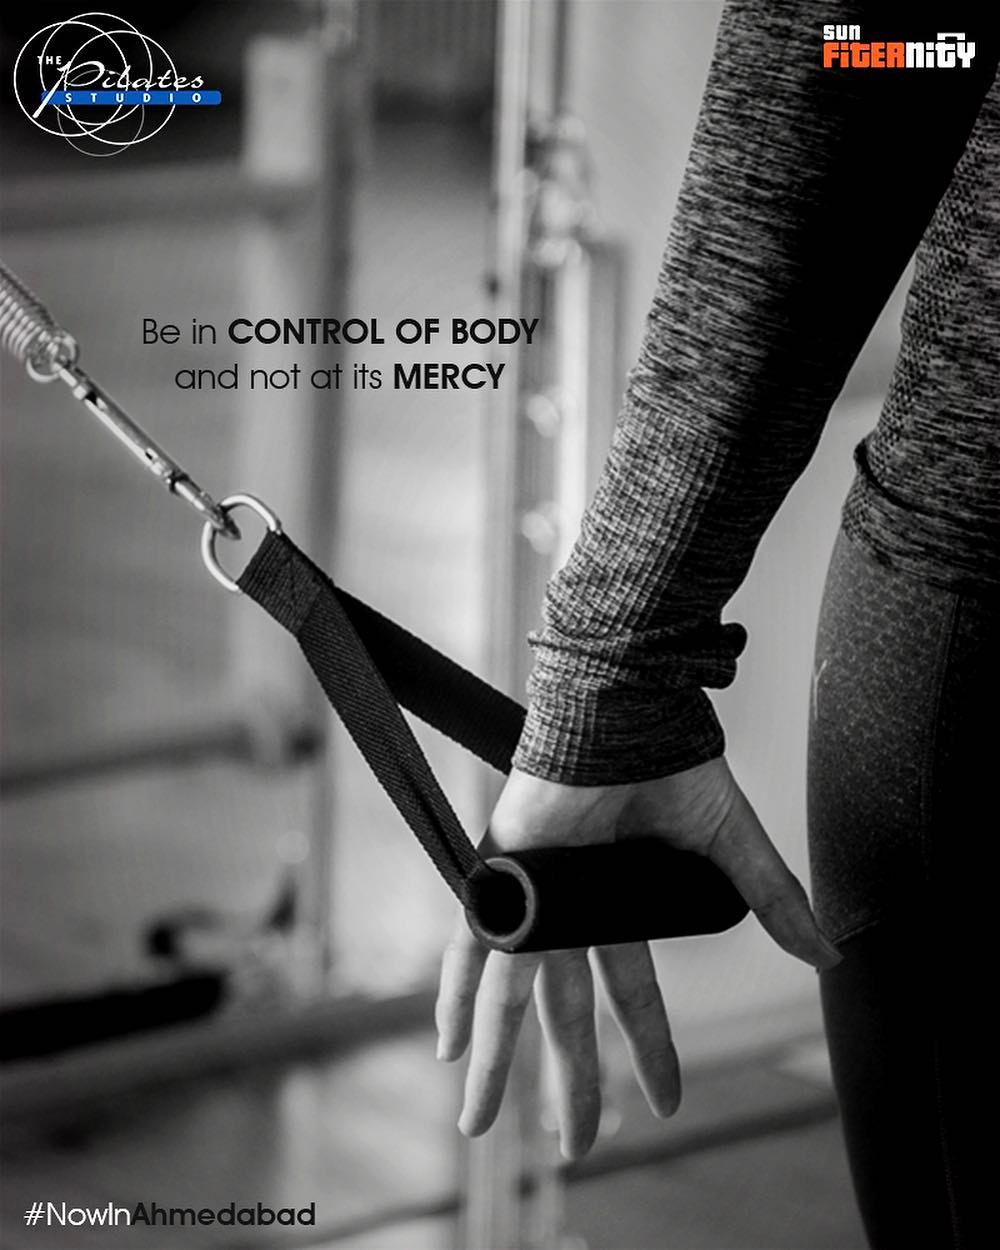 Be in control of body and not at its mercy !
.
.
Pilates is the correct remote
.
.
#workoutwednesday #pilates #pilatesfit #pilatesreformer #PilatesGirl #realmendopilates #nowinahmedabad #knowmore #fitness #fitstagram #fitnessstudio #pilatesstudioahmedabad